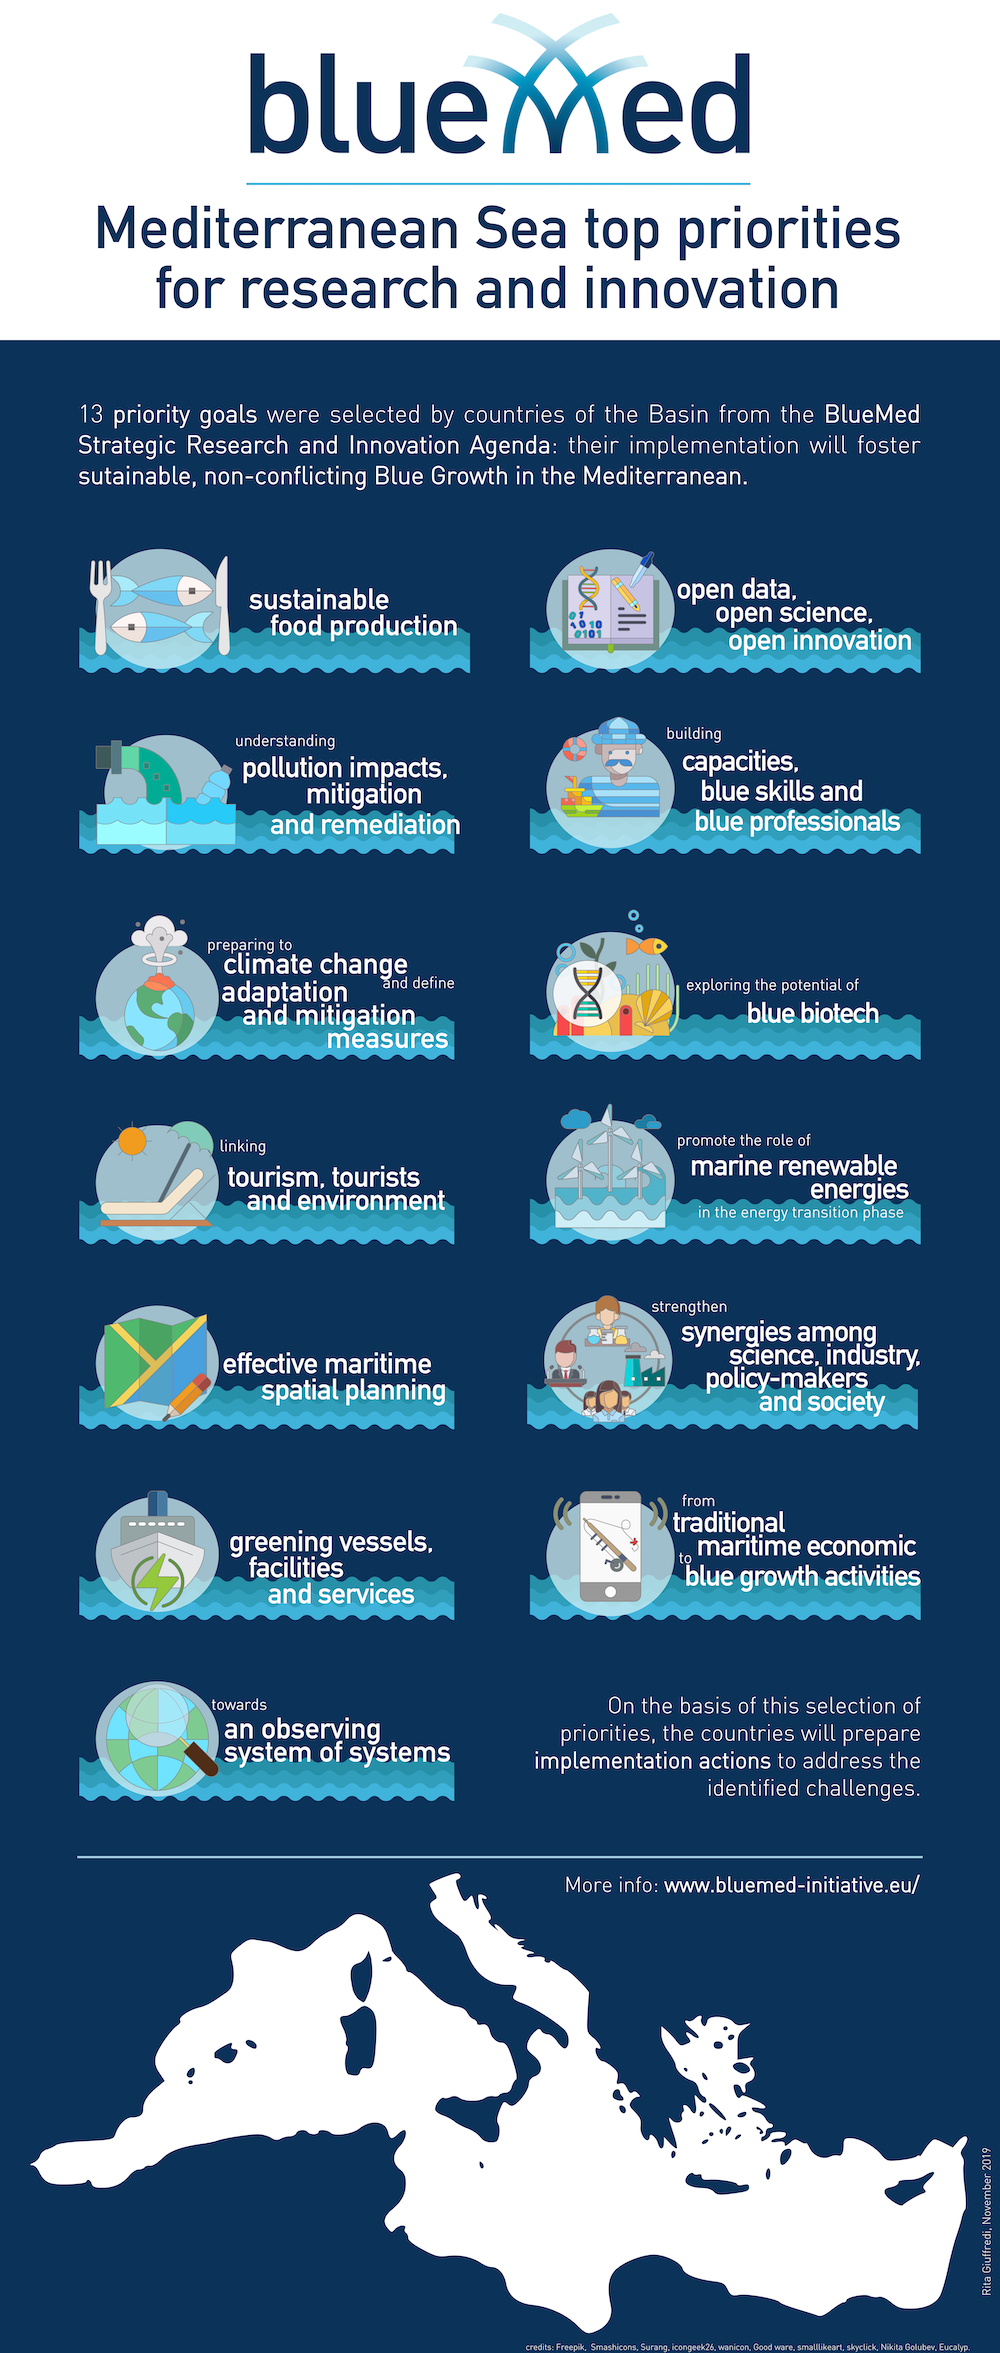 An infographic of the priorities for the Mediterranean identified within the BlueMed initiative.